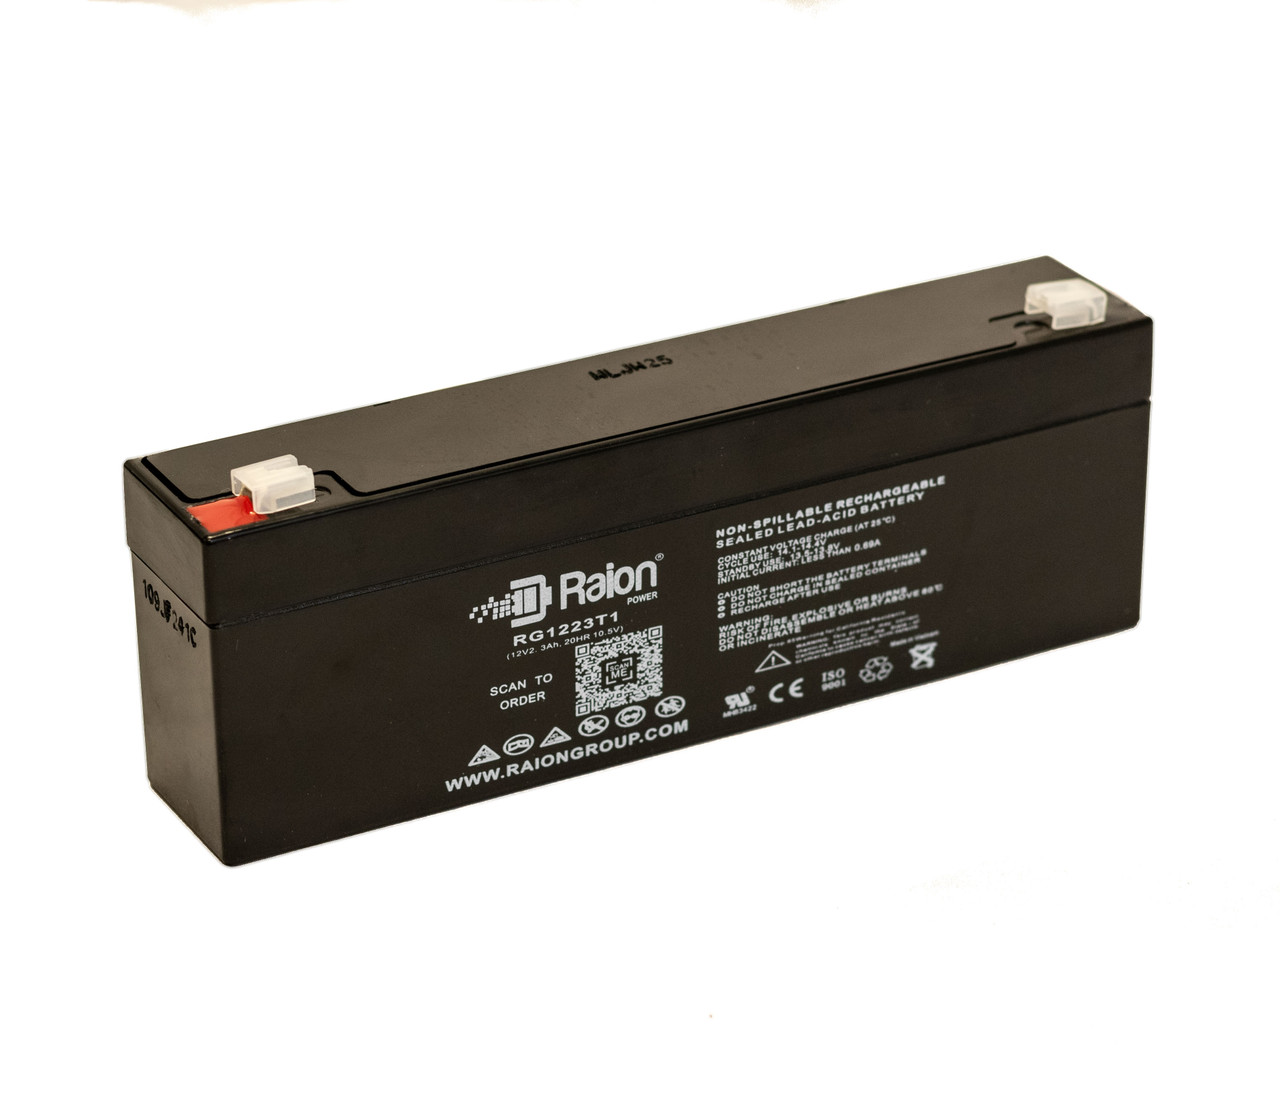 Raion Power RG1223T1 Replacement Battery for Canbat CBL1.9-12